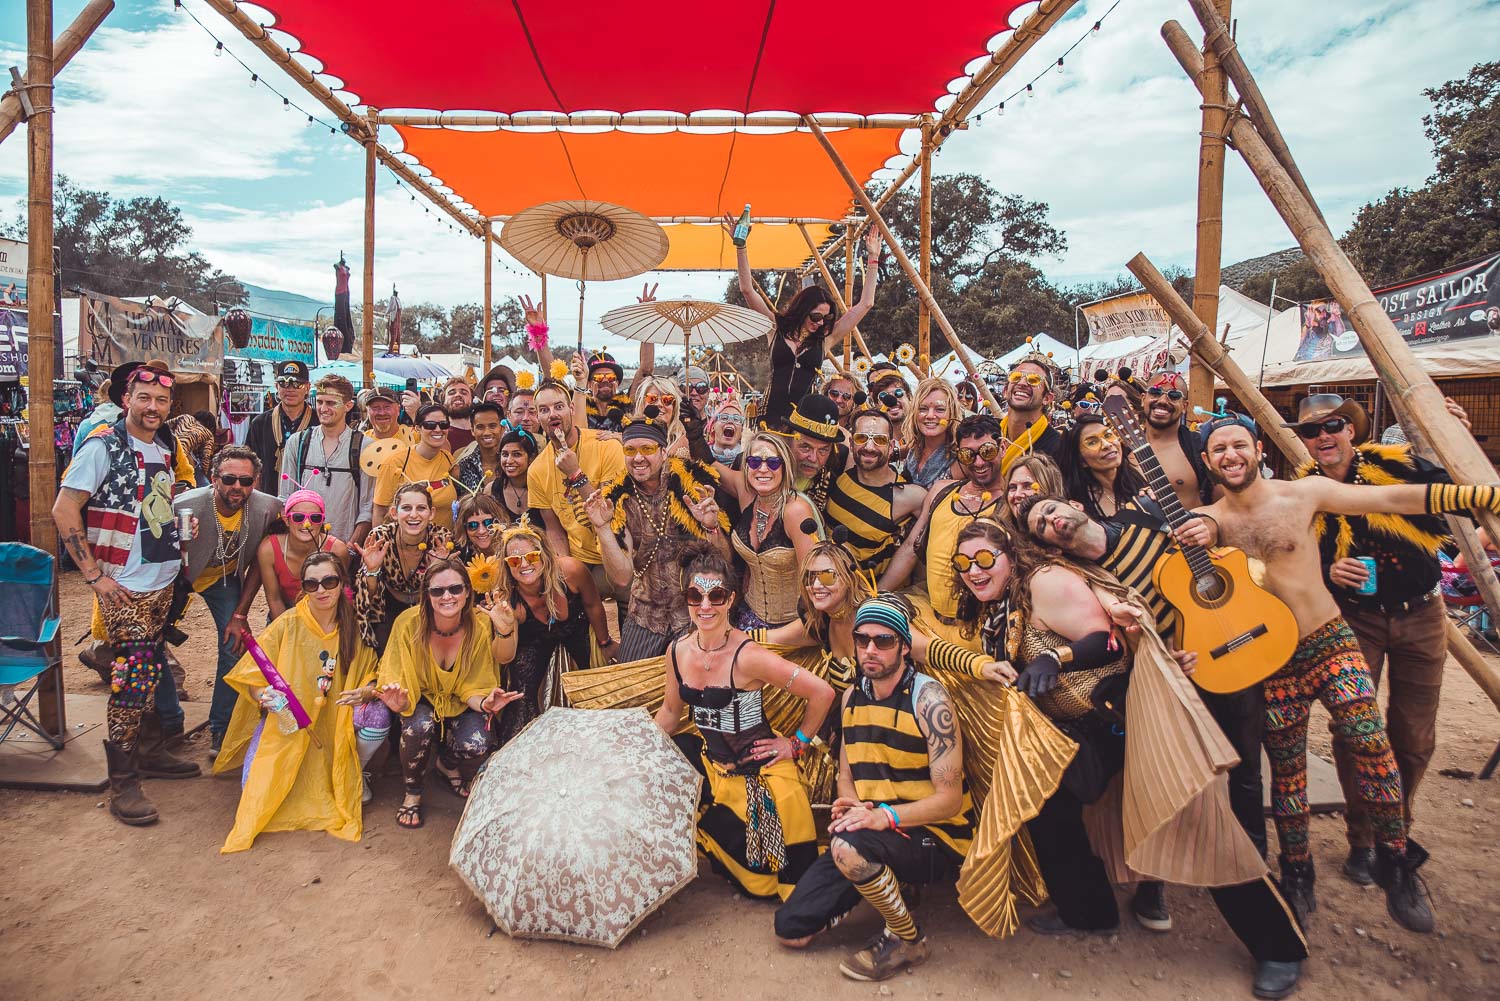 Lucidity Festival Review